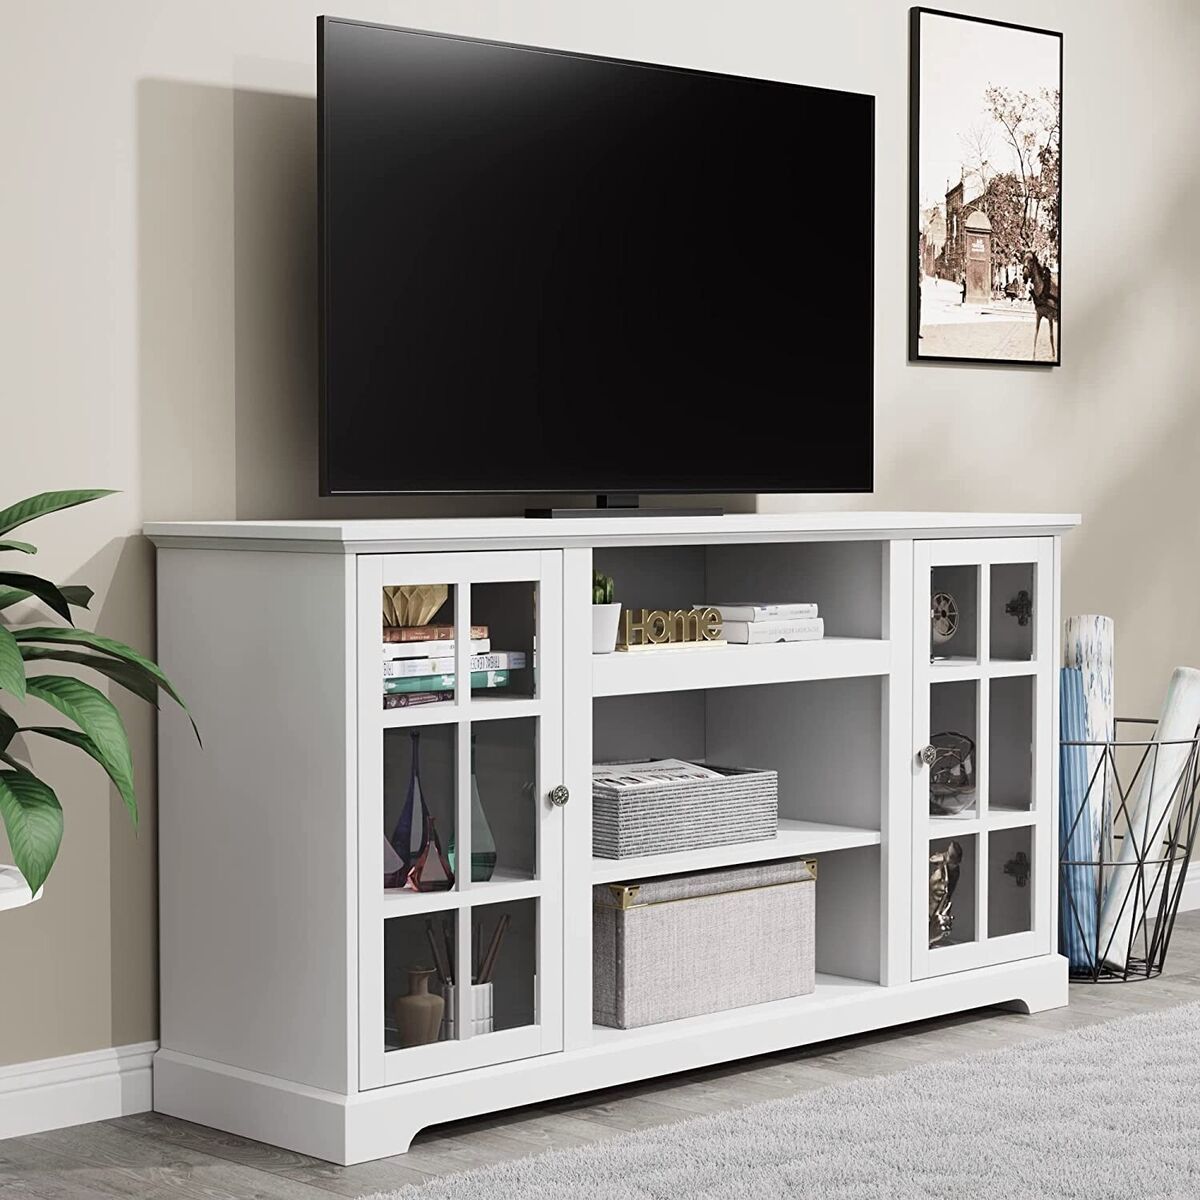 58" Tv Stand Cabinet For Tv's Up To 65" Entertainment Center W/storage  Shelves | Ebay Intended For Entertainment Center With Storage Cabinet (Photo 3 of 15)